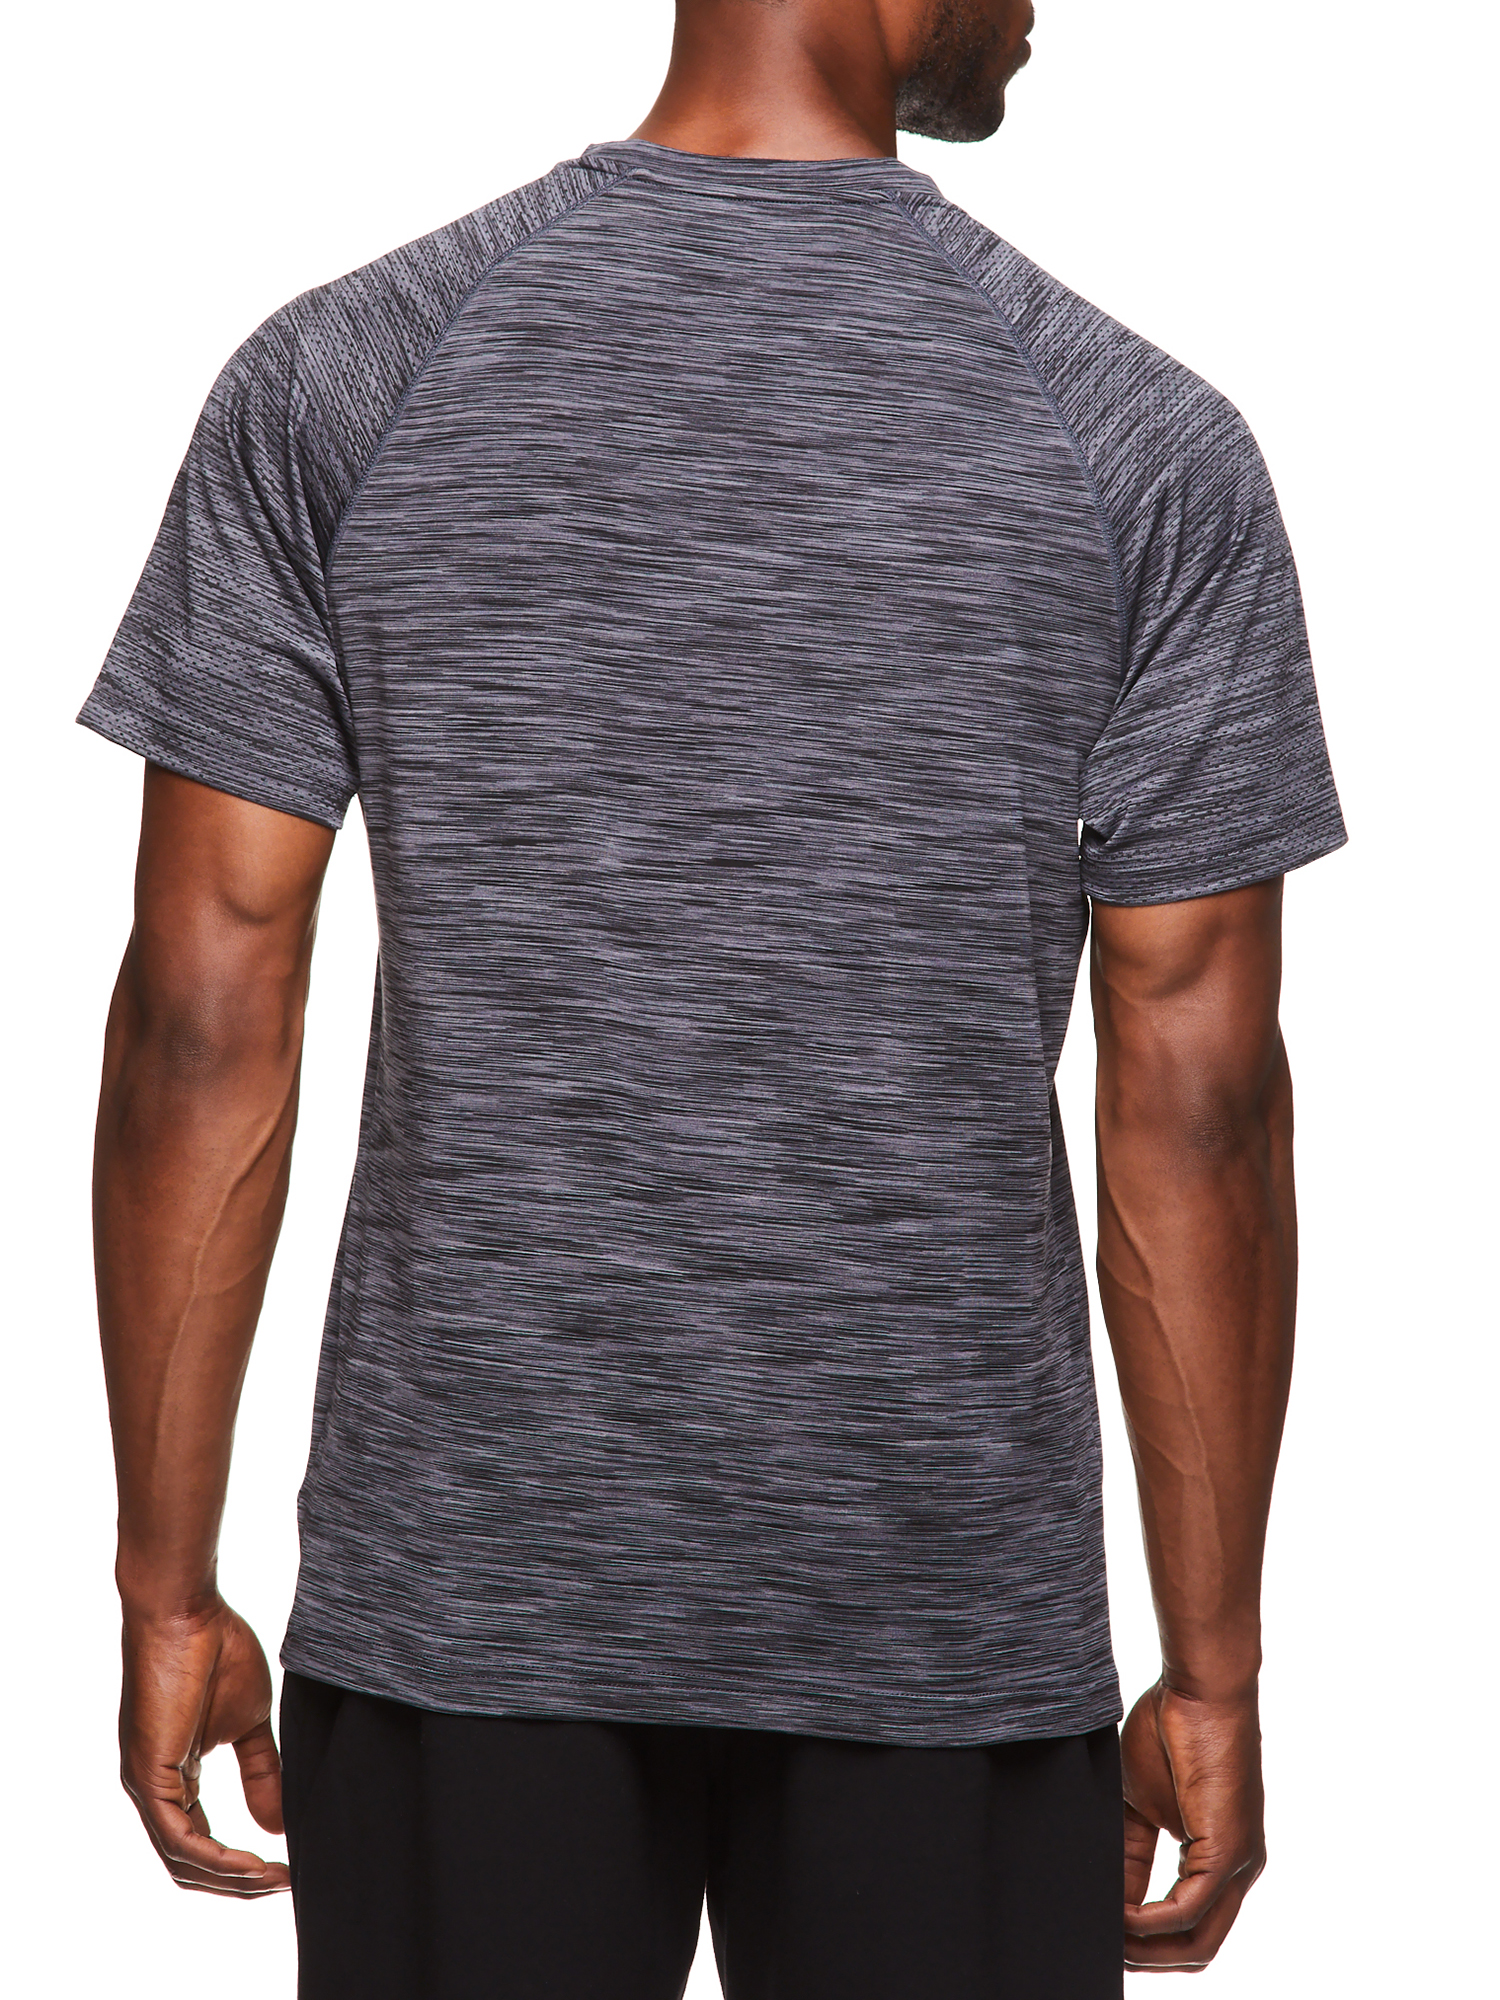 Reebok Men's and Big Men's Active Short Sleeve Tee with Mesh Sleeves, up to Size 3XL - image 3 of 4